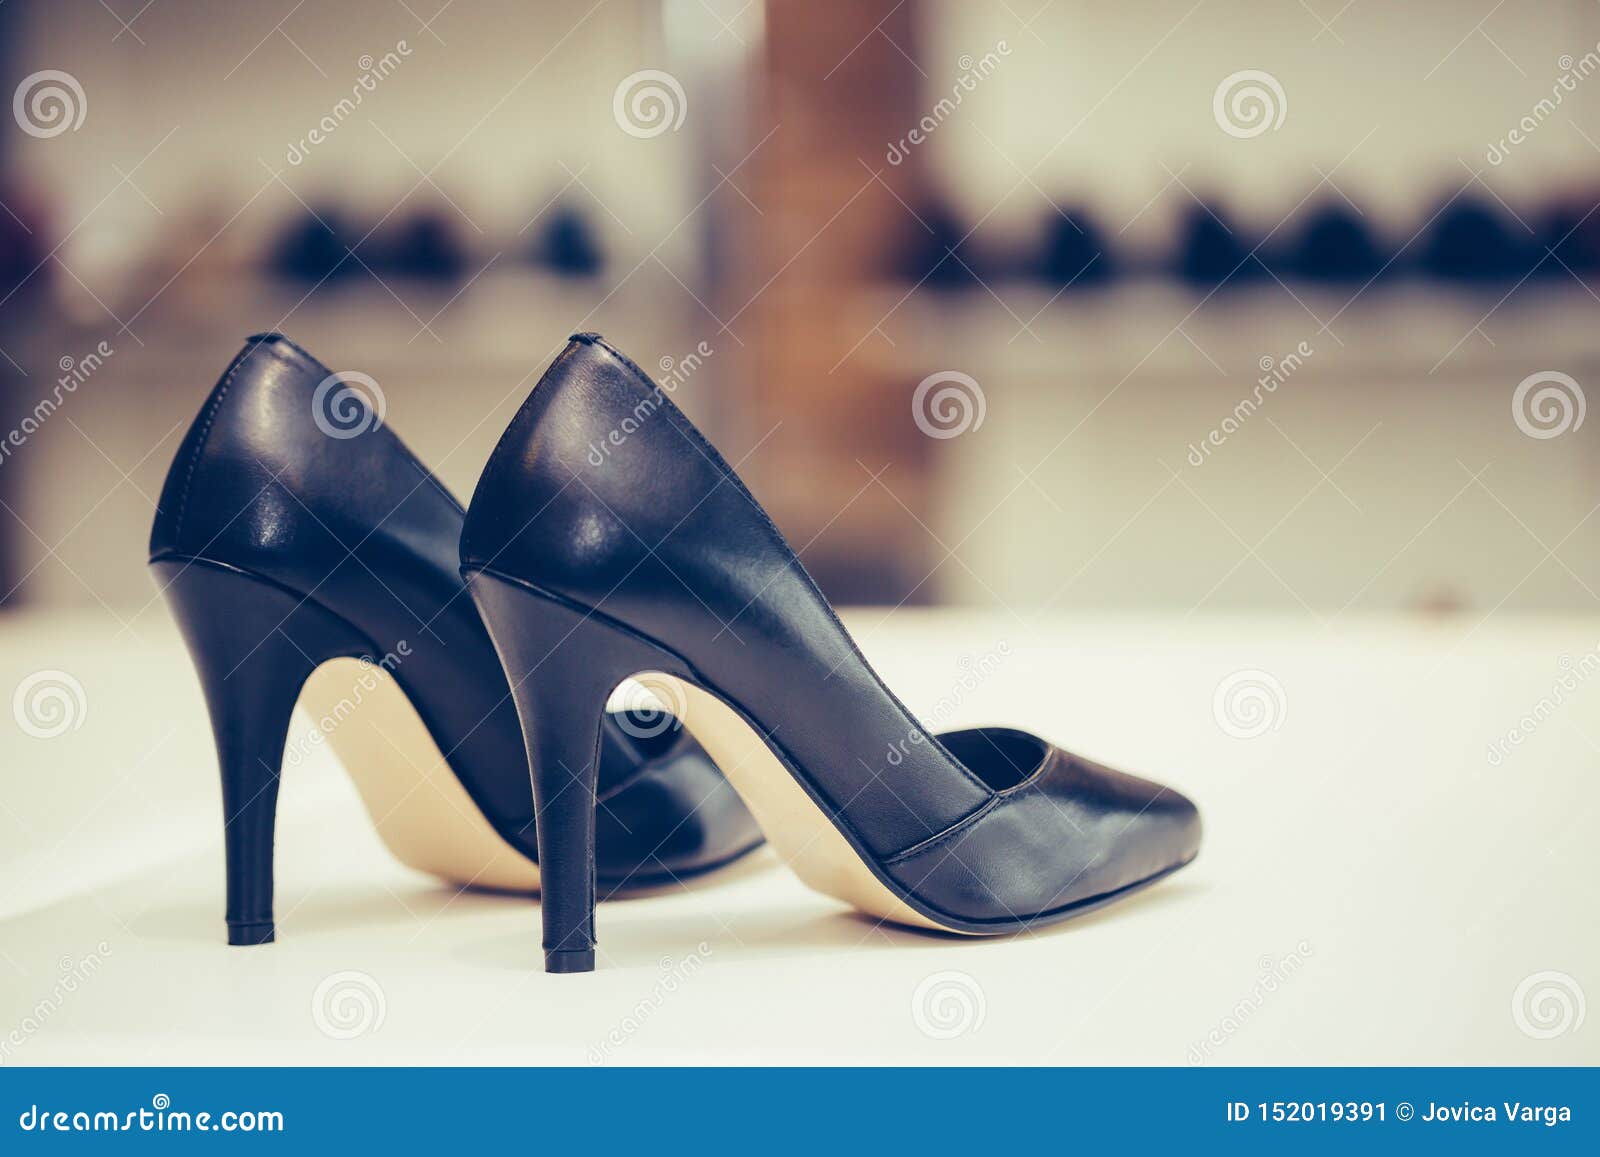 Luxury High Heels Isolated On White Background Stock Photo, Picture and  Royalty Free Image. Image 106511637.